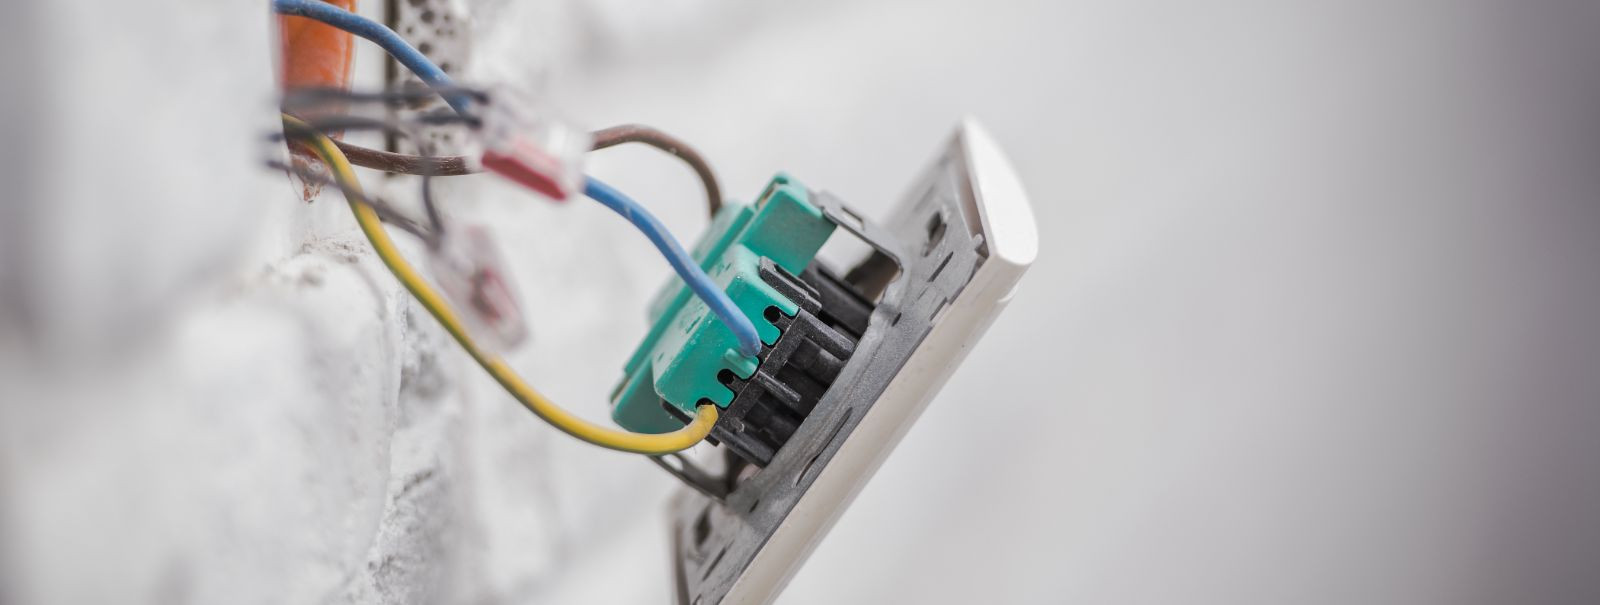 Electrical maintenance involves the routine checking, servicing, and repairing of electrical equipment and systems to ensure they operate efficiently and safely